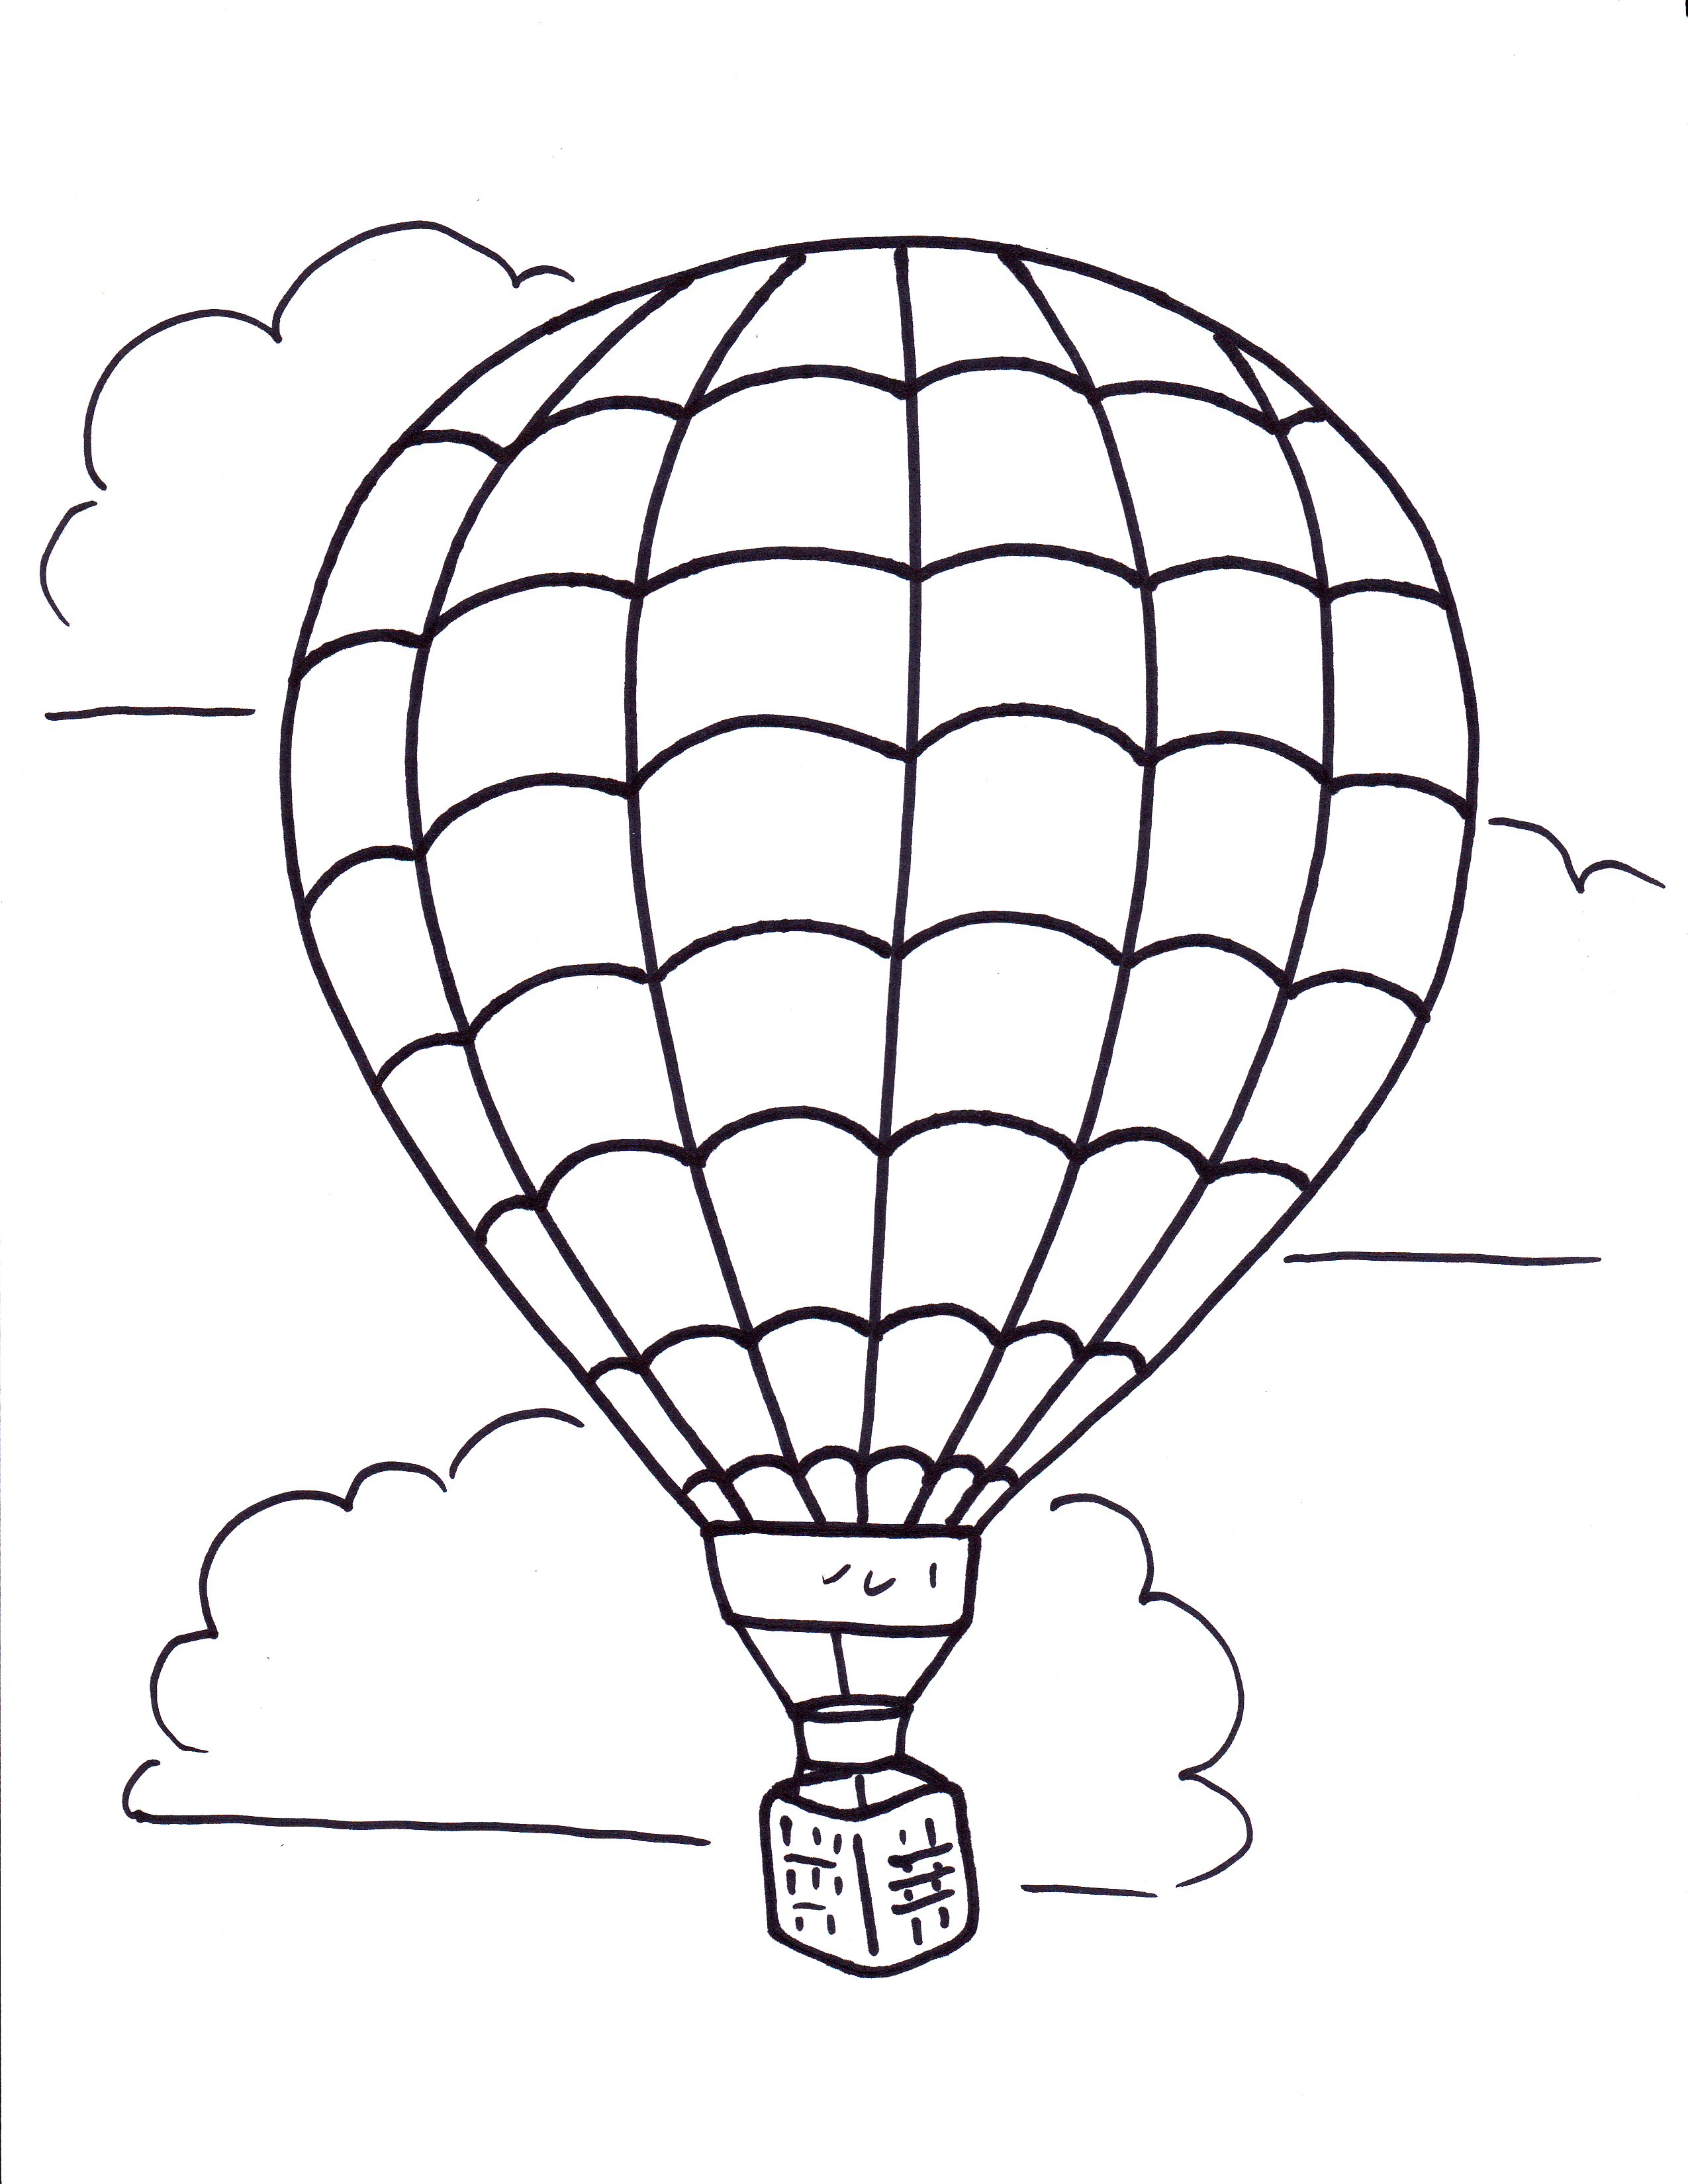 Hot Air Balloon Coloring Pages - Free Large Images - Coloring Home